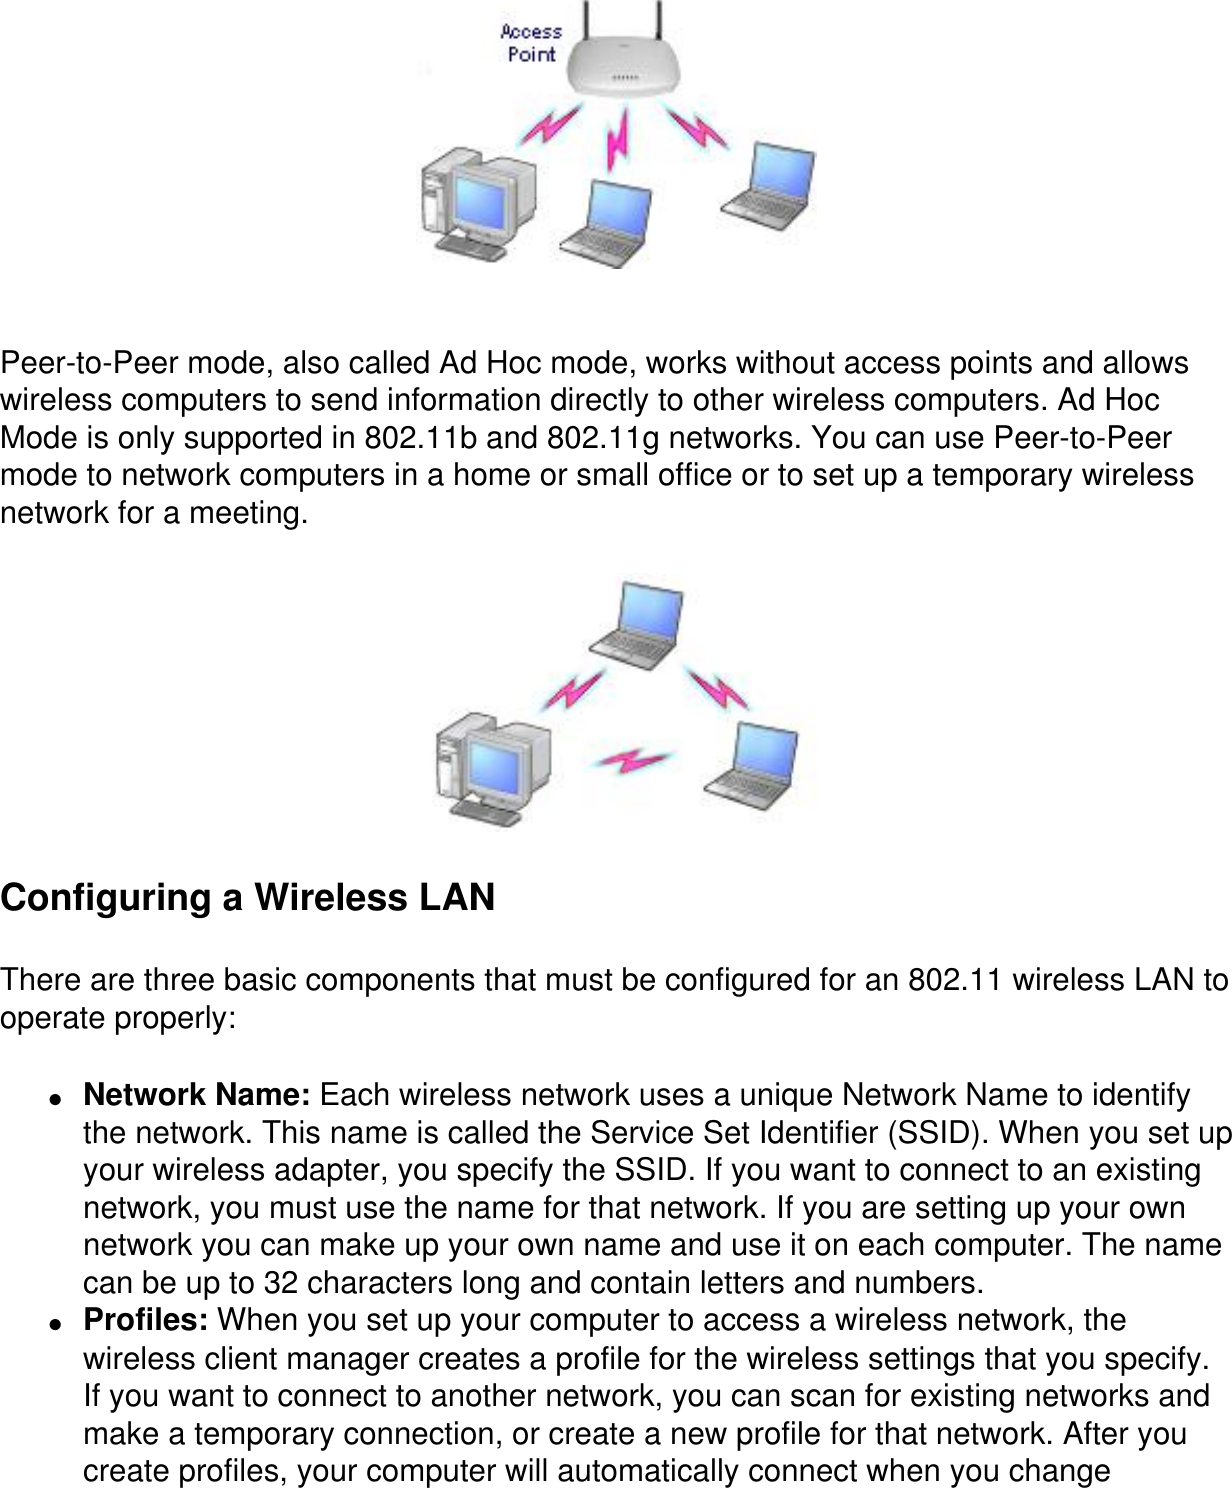  Peer-to-Peer mode, also called Ad Hoc mode, works without access points and allows wireless computers to send information directly to other wireless computers. Ad Hoc Mode is only supported in 802.11b and 802.11g networks. You can use Peer-to-Peer mode to network computers in a home or small office or to set up a temporary wireless network for a meeting. Configuring a Wireless LANThere are three basic components that must be configured for an 802.11 wireless LAN to operate properly:●     Network Name: Each wireless network uses a unique Network Name to identify the network. This name is called the Service Set Identifier (SSID). When you set up your wireless adapter, you specify the SSID. If you want to connect to an existing network, you must use the name for that network. If you are setting up your own network you can make up your own name and use it on each computer. The name can be up to 32 characters long and contain letters and numbers.●     Profiles: When you set up your computer to access a wireless network, the wireless client manager creates a profile for the wireless settings that you specify. If you want to connect to another network, you can scan for existing networks and make a temporary connection, or create a new profile for that network. After you create profiles, your computer will automatically connect when you change 